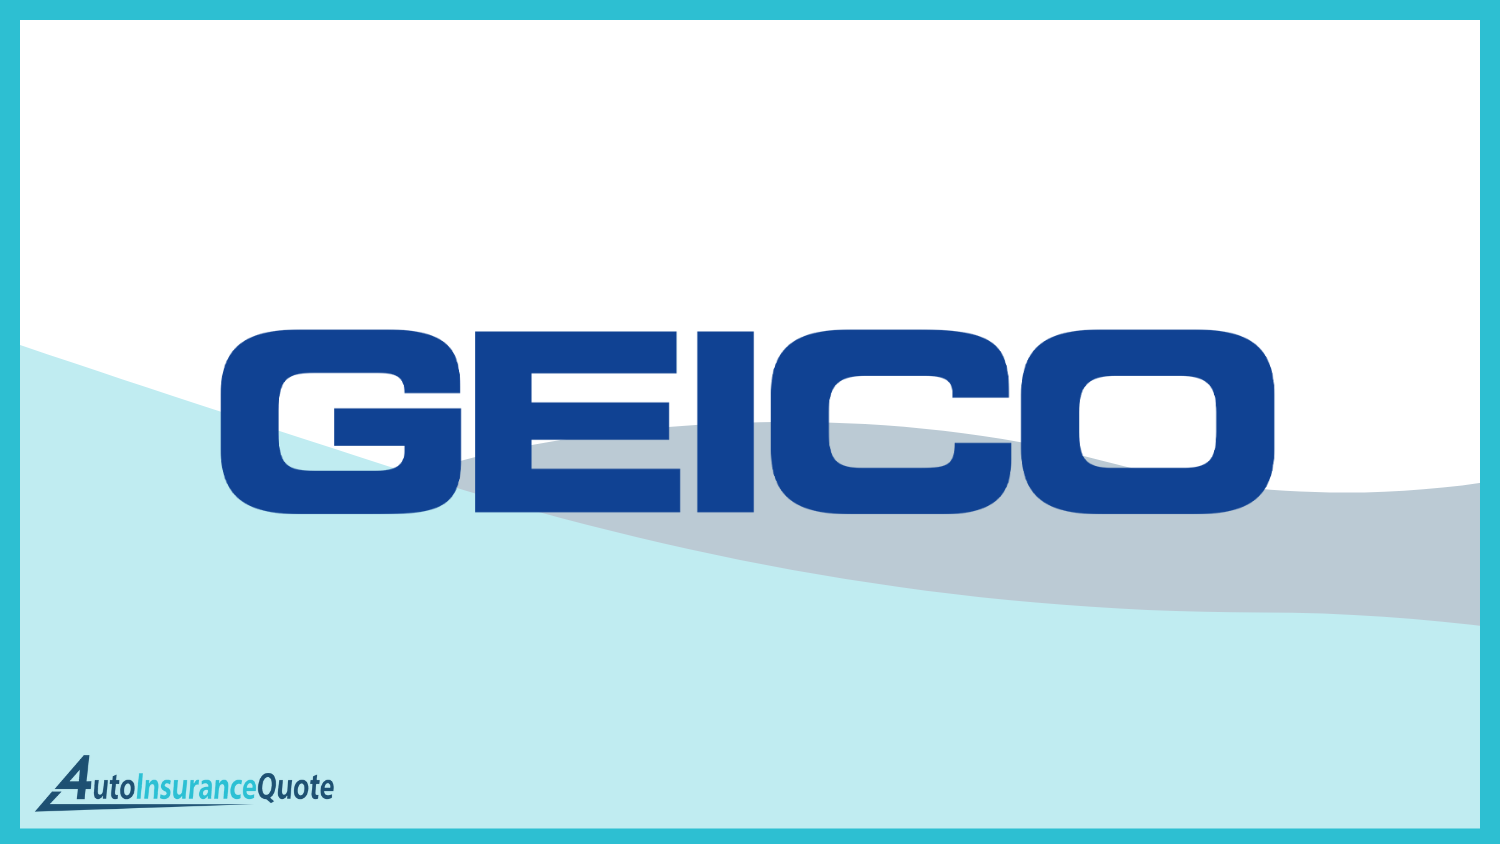 Geico: Best Auto Insurance for Nannies